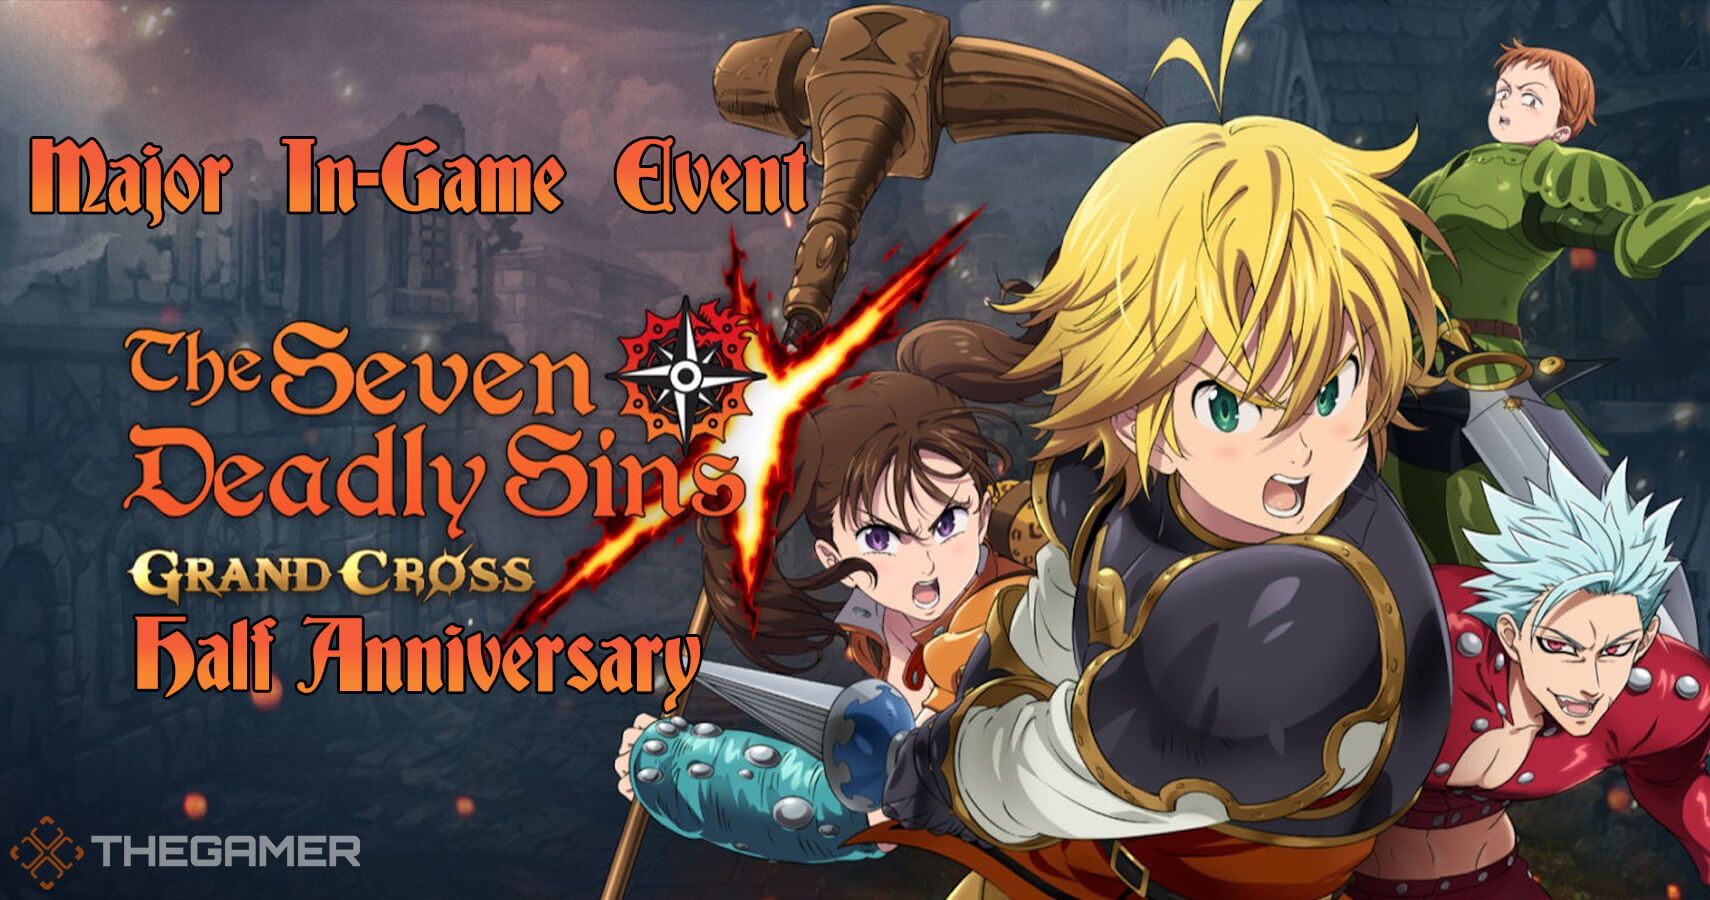 The Seven Deadly Sins Grand Cross - Half Anniversary In-Game Event